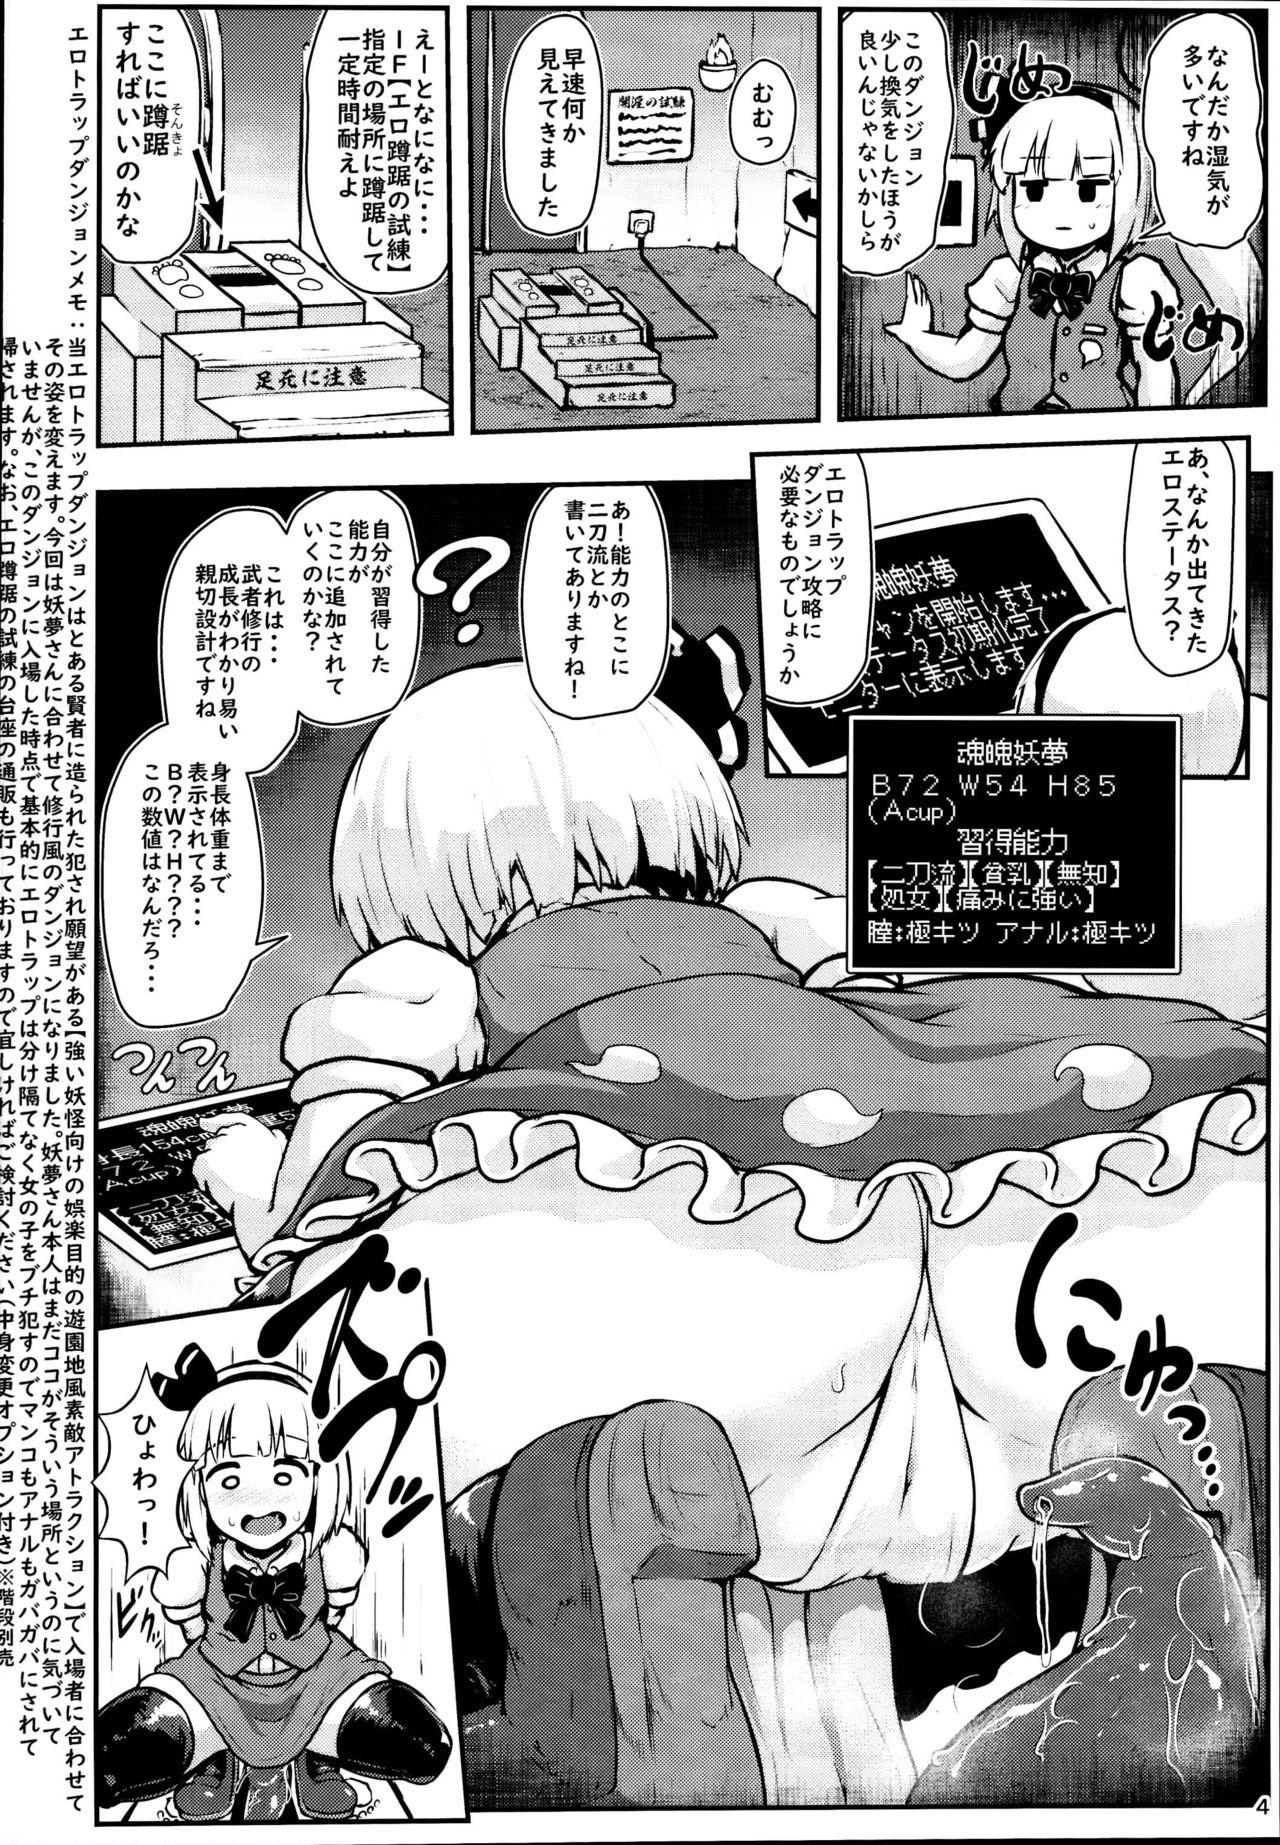 Boobies Youmu in Ero Trap Dungeon - Touhou project Indoor - Page 4